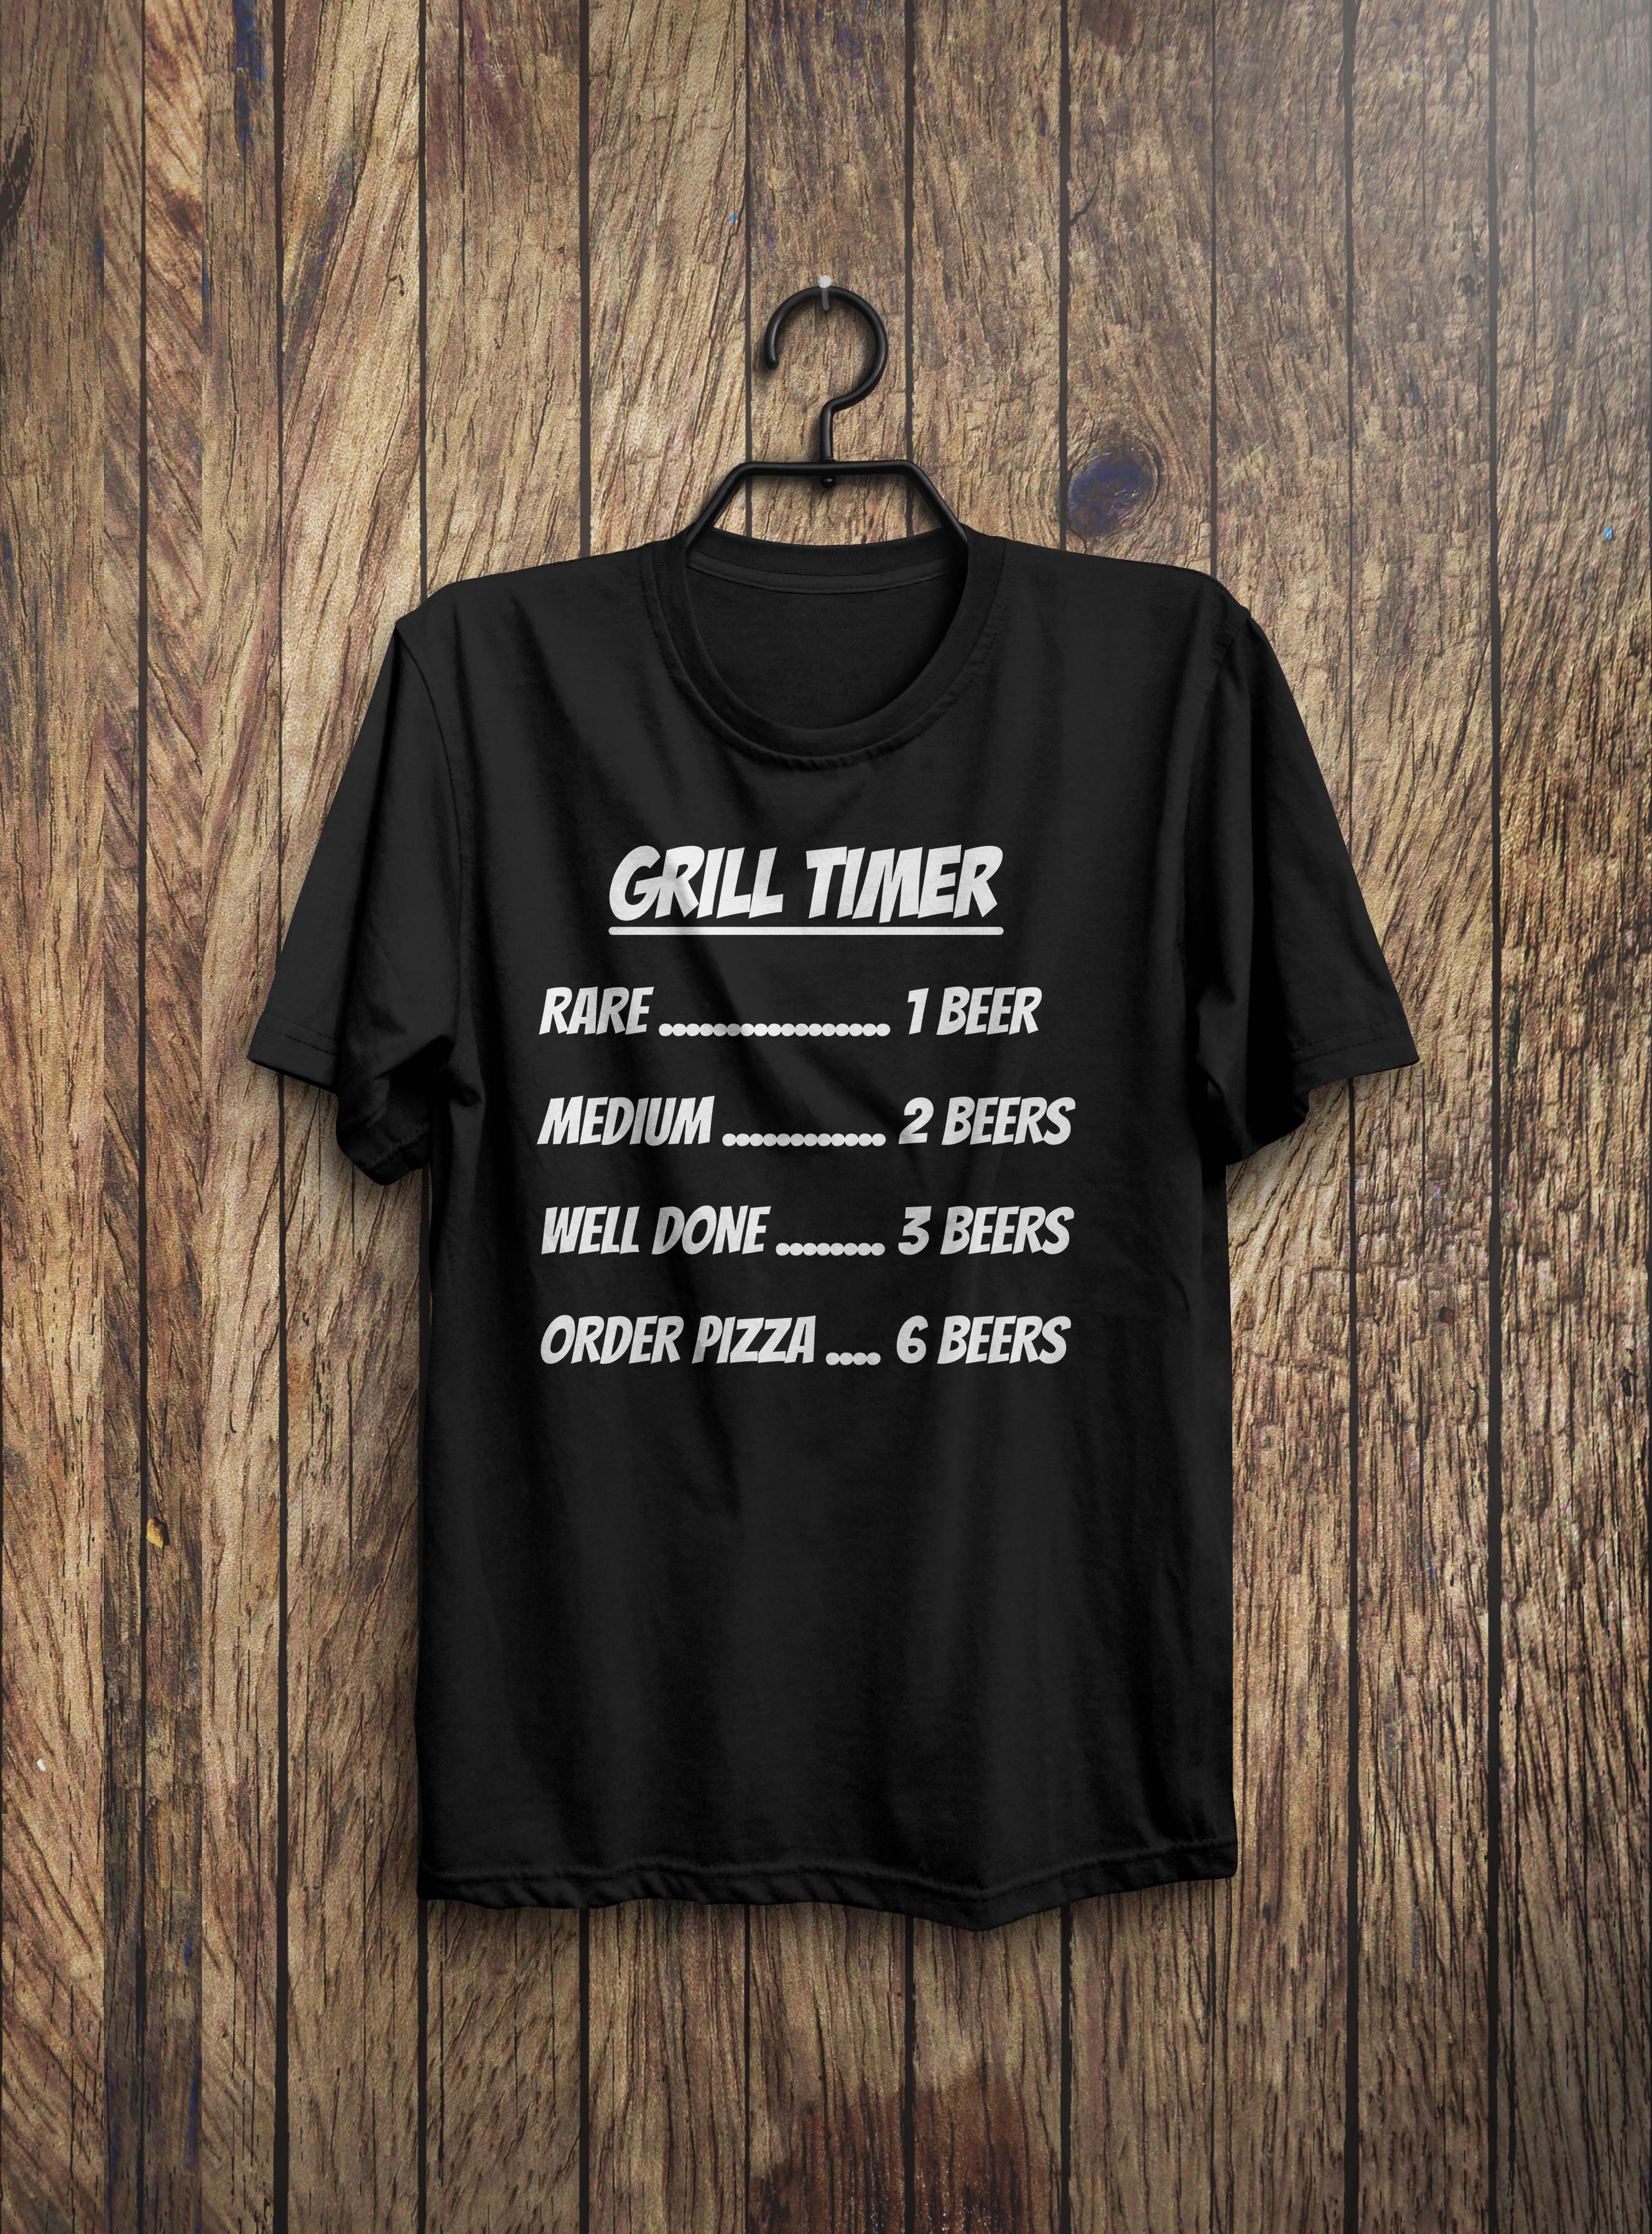 Grill Master Bbq Shirt, Dirty Joke Shirt, Gag Gifts for Men, Smoking and  Grilling Gifts, Funny Bbq Gifts, Meat Smoker Grill Gifts for Dad 